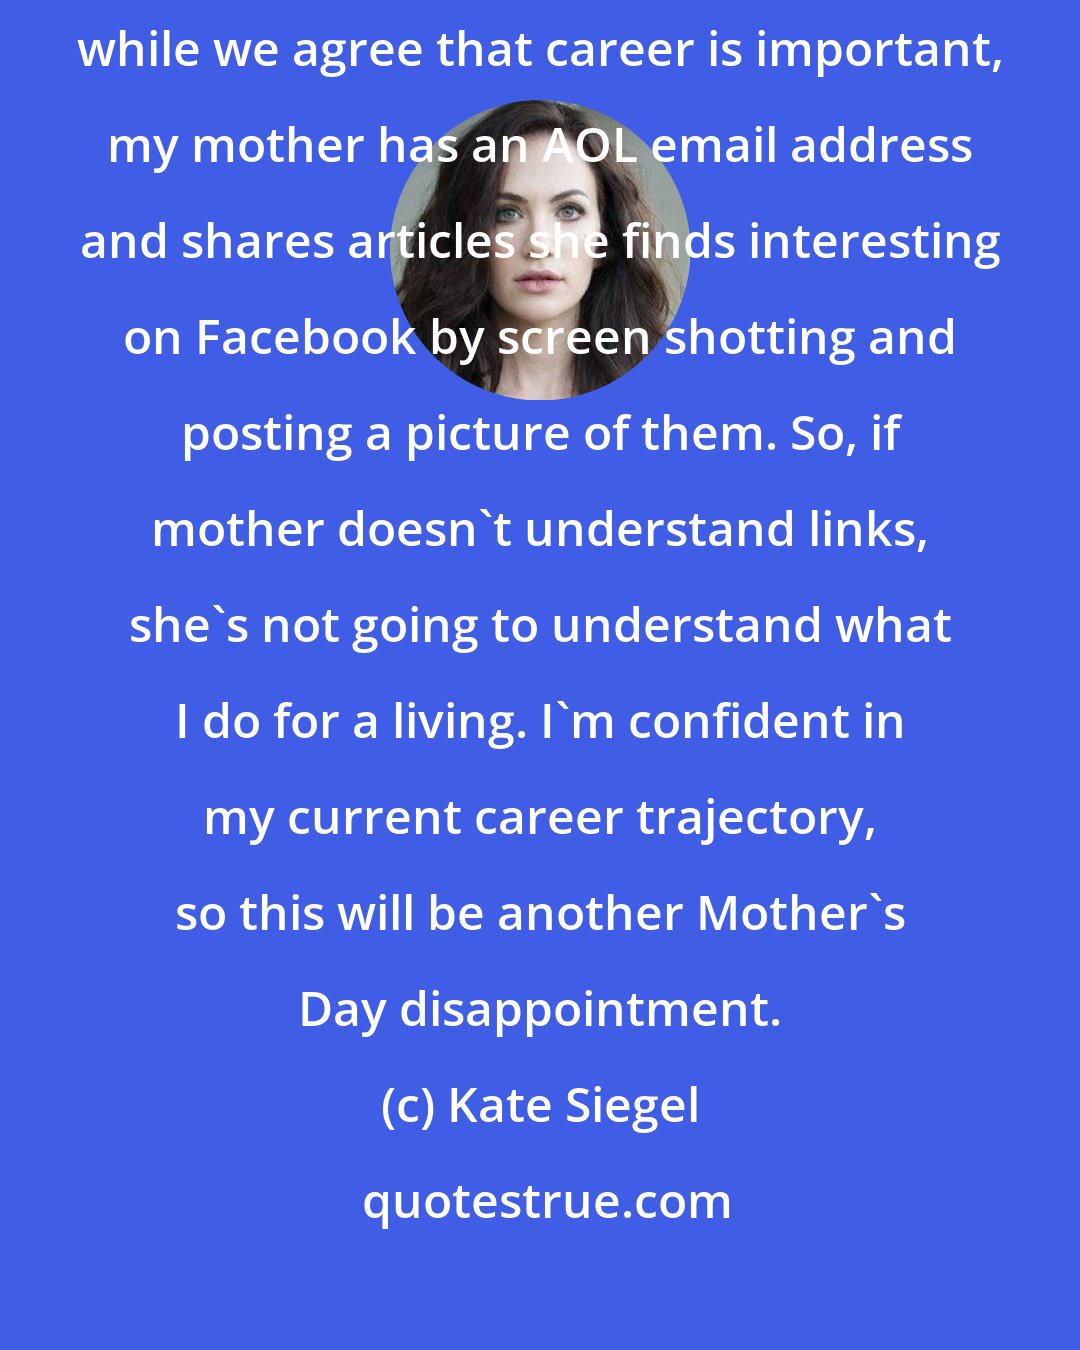 Kate Siegel: I do have health insurance (don't fine me, [Barack] Obama!). And while we agree that career is important, my mother has an AOL email address and shares articles she finds interesting on Facebook by screen shotting and posting a picture of them. So, if mother doesn't understand links, she's not going to understand what I do for a living. I'm confident in my current career trajectory, so this will be another Mother's Day disappointment.